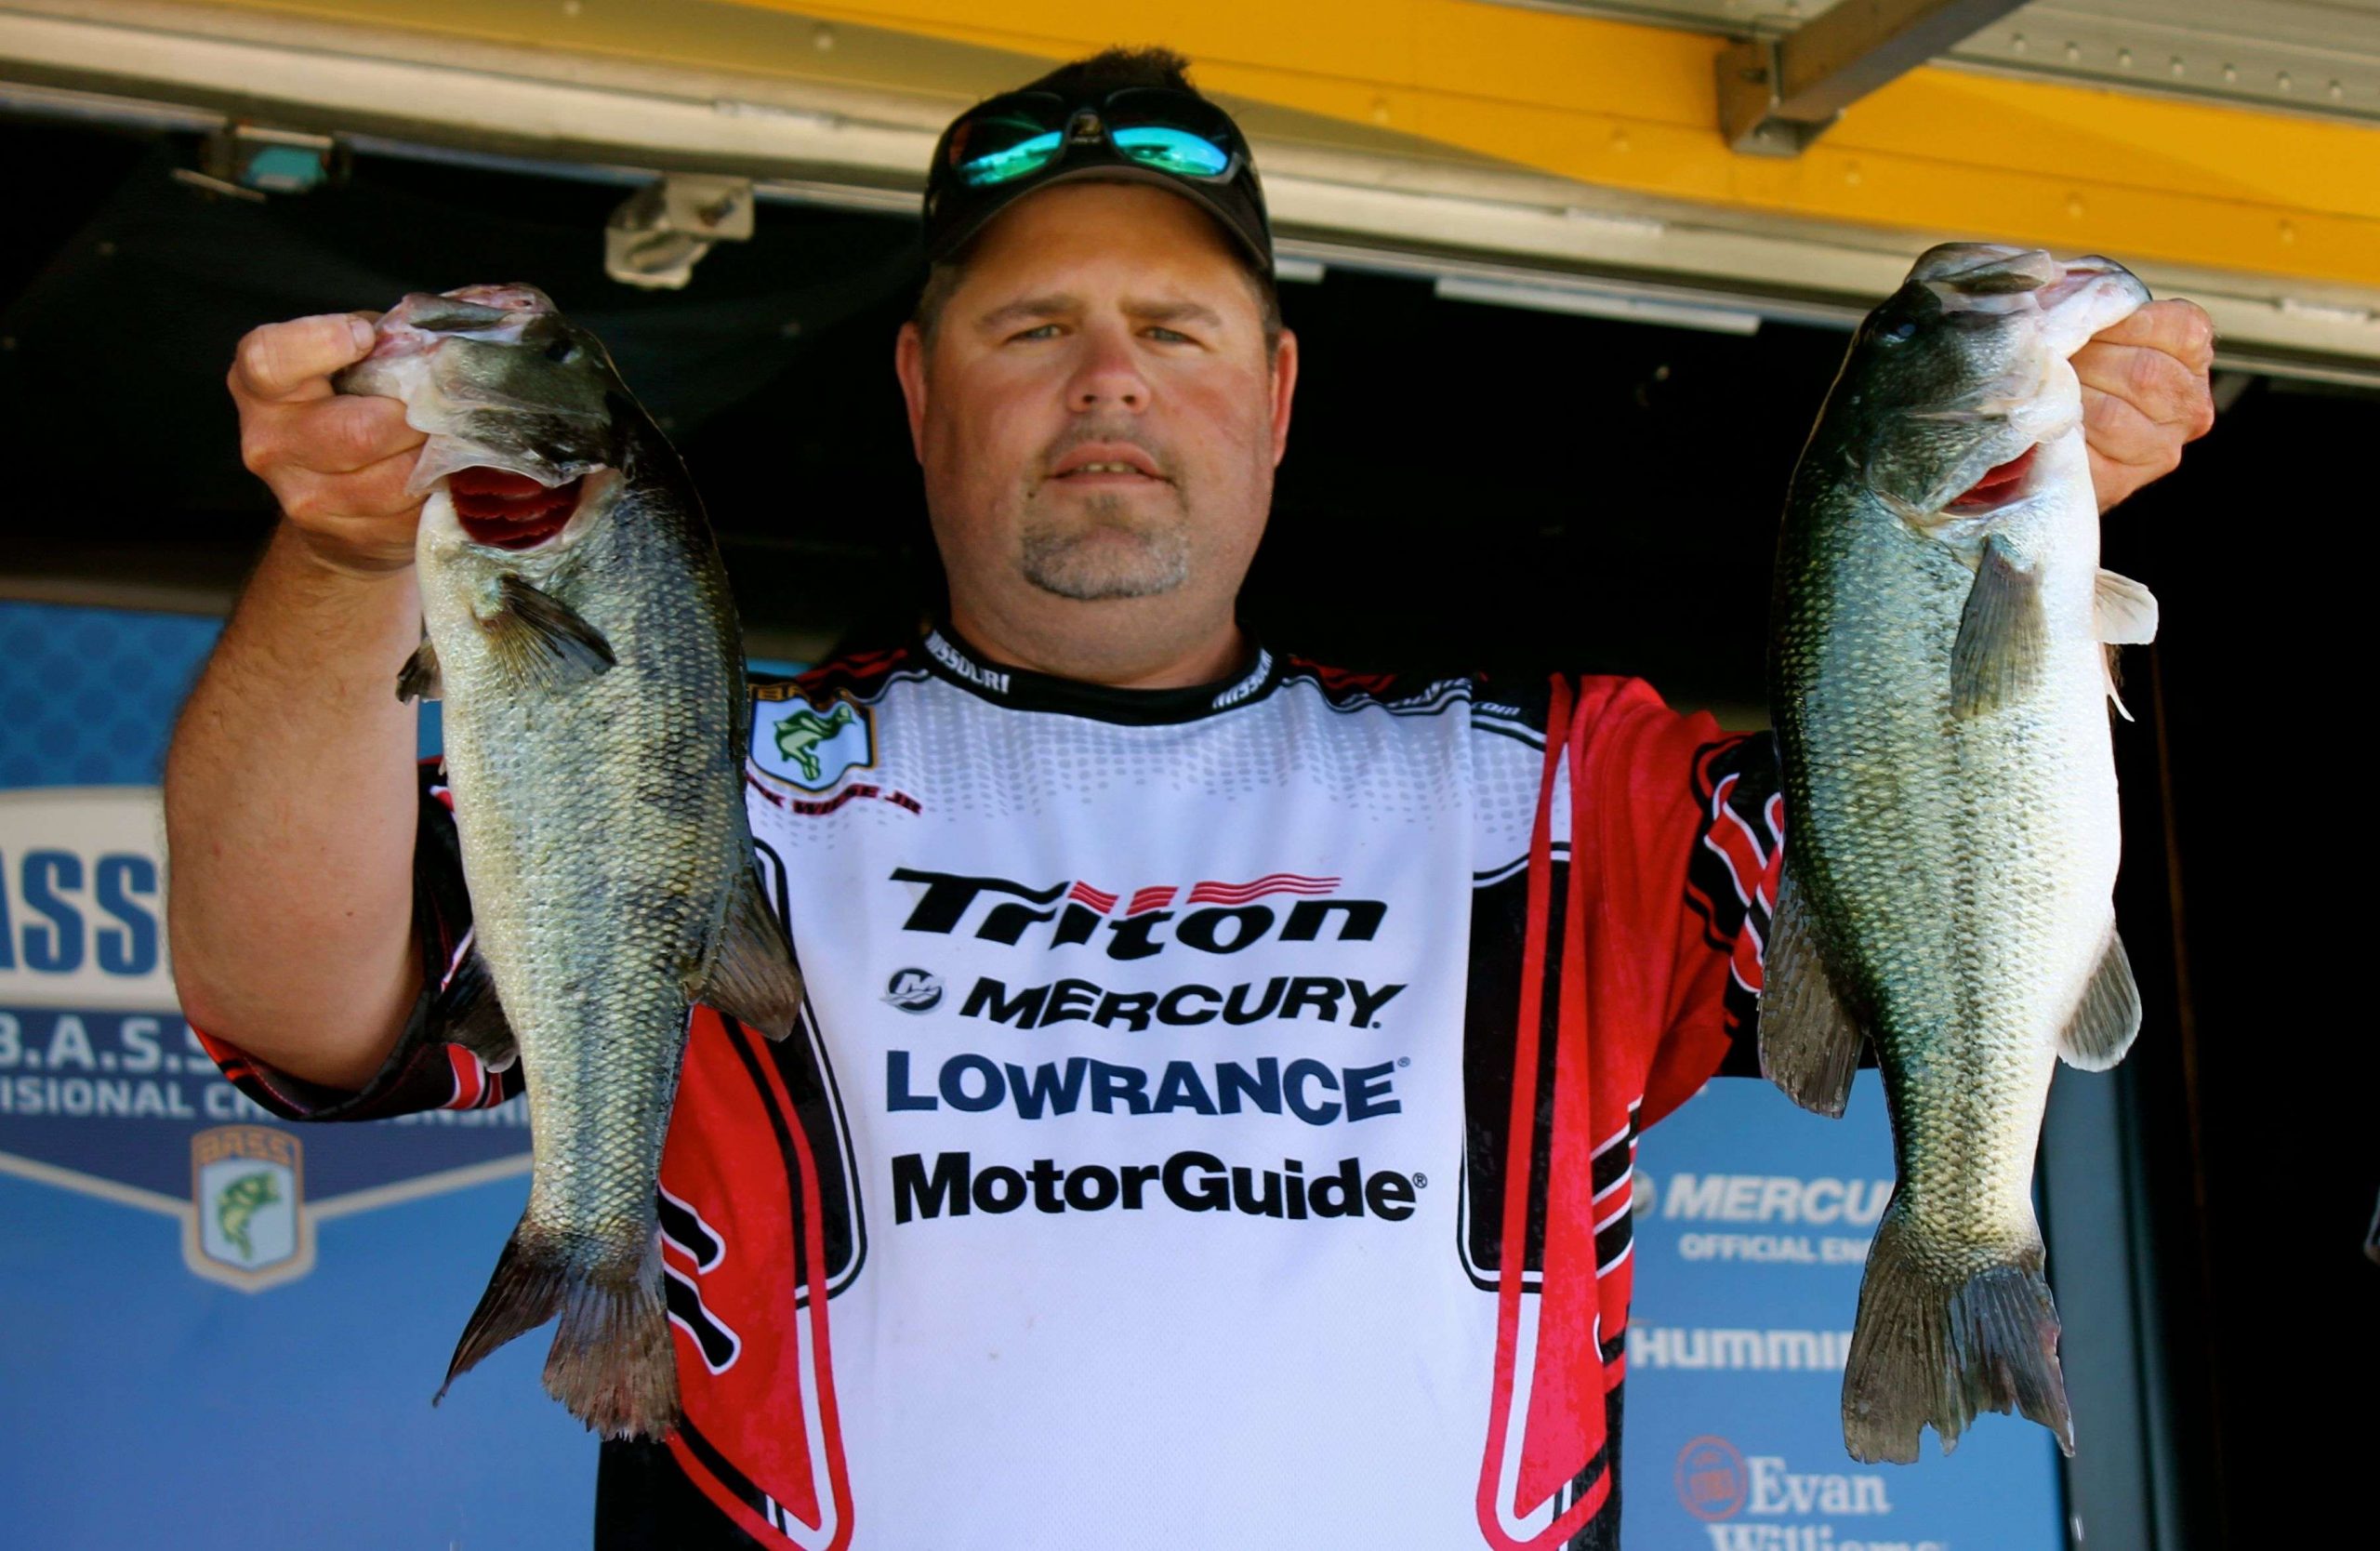 Missouri B.A.S.S. Nation angler Mark Wiese, Jr. is in third place with 13-8. Back home in High Ridge, Mo., heâs a sales manager.